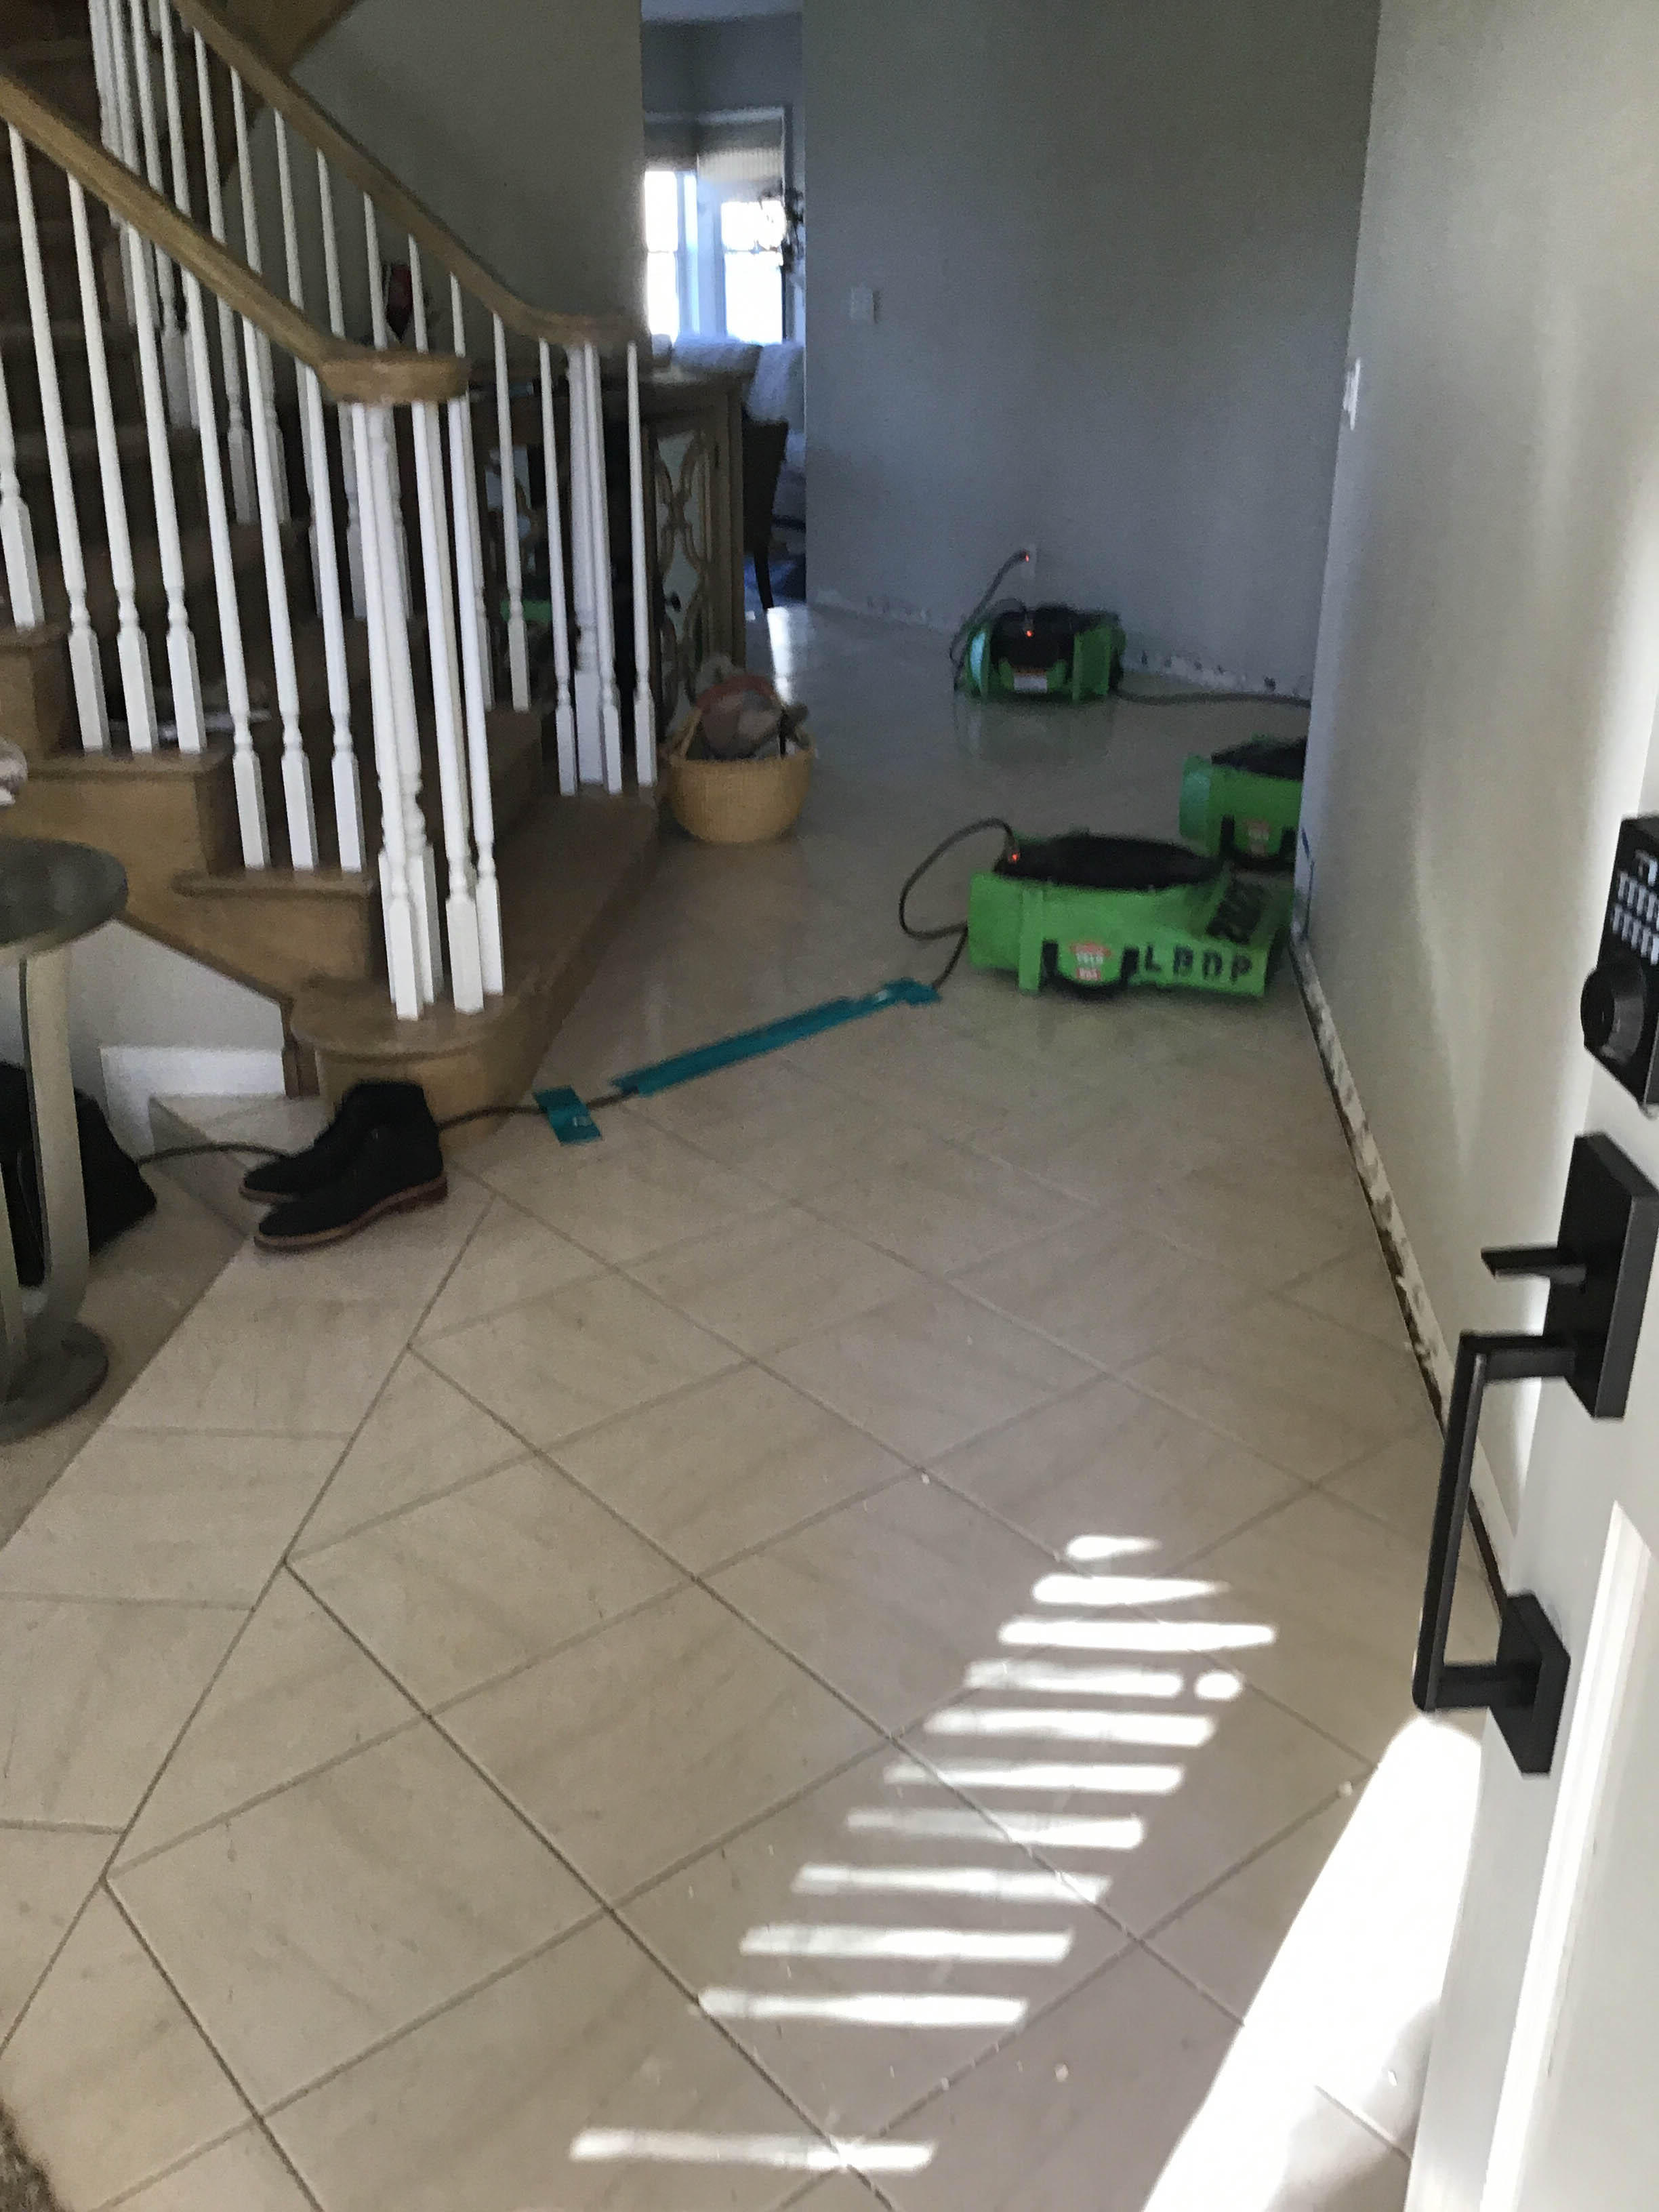 Do you require assistance with water damage restoration in Laguna Beach, CA? SERVPRO of Laguna Beach / Dana Point offers the expertise to do any job quickly and effectively. Please give us a call!